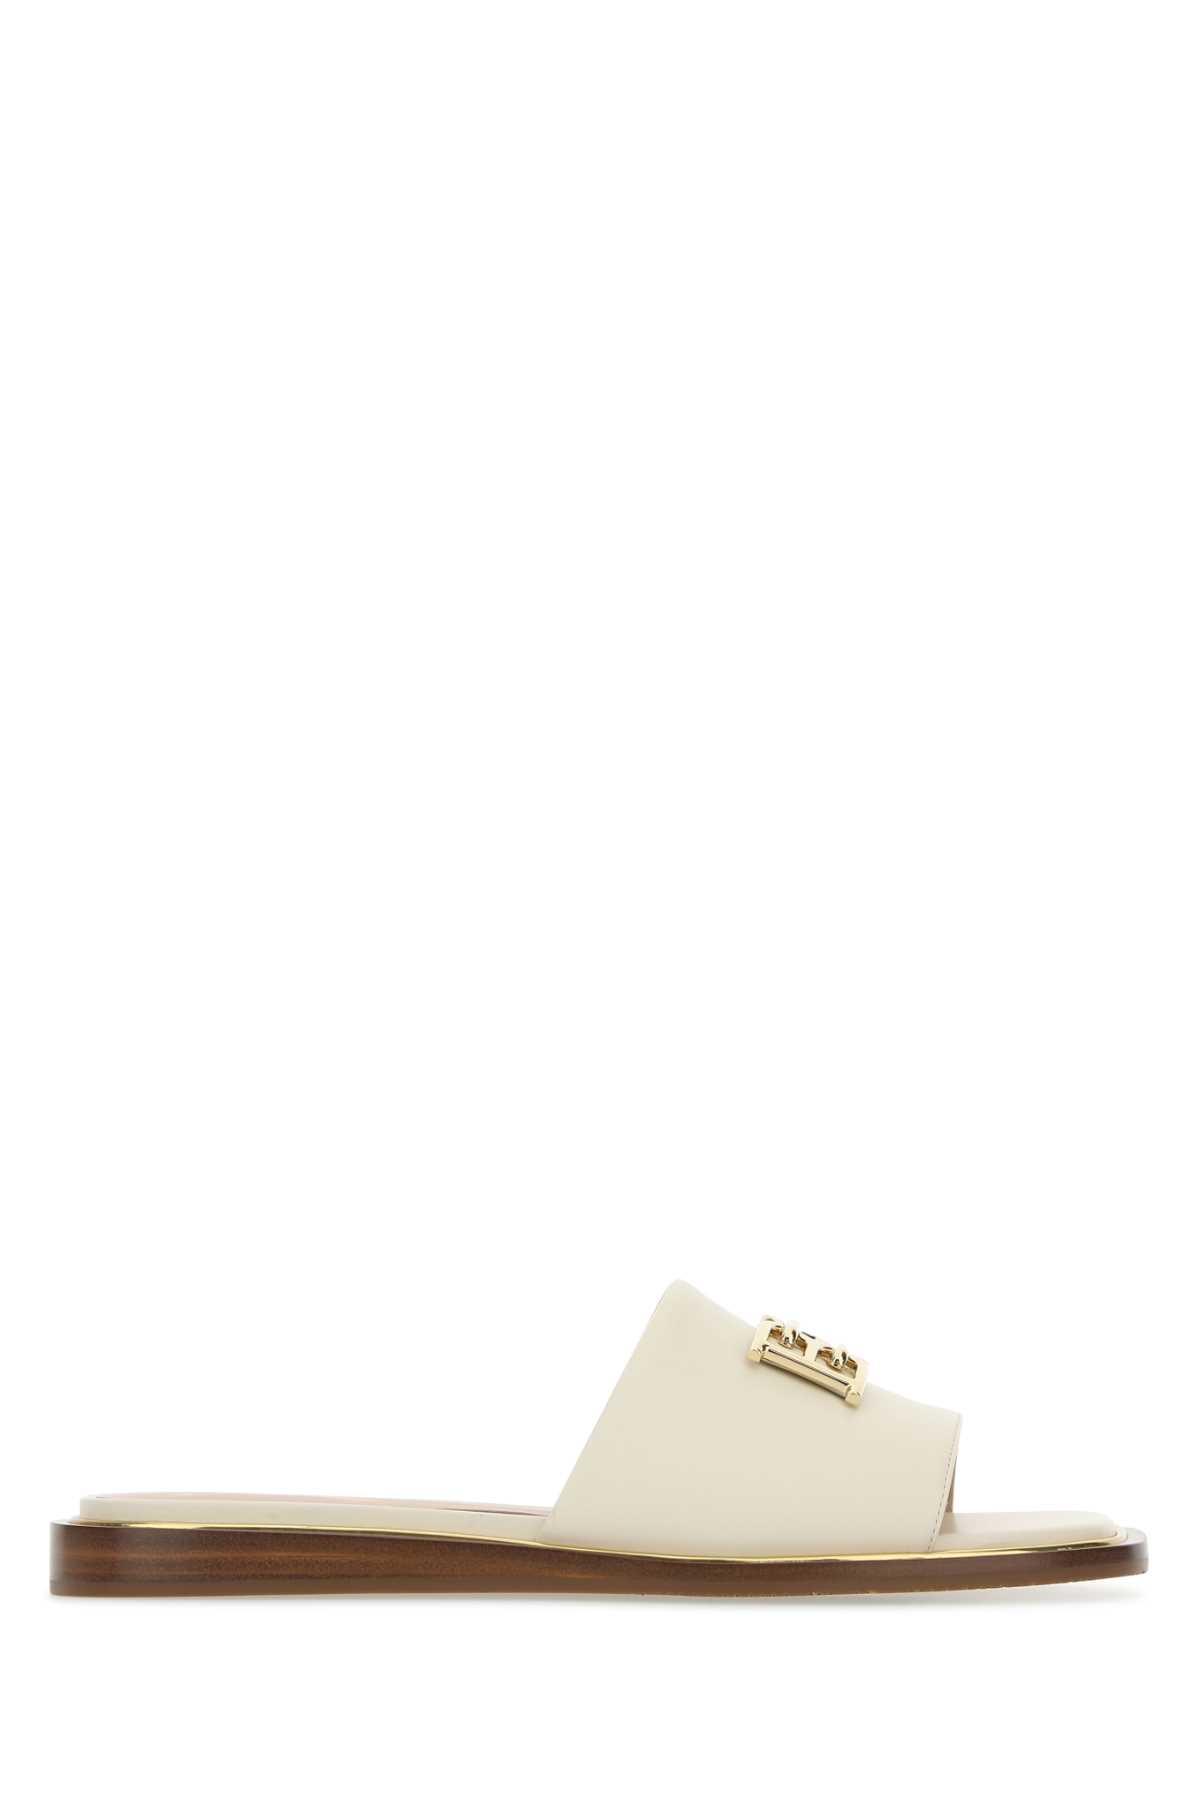 Bally Ivory Leather Eloise Slippers